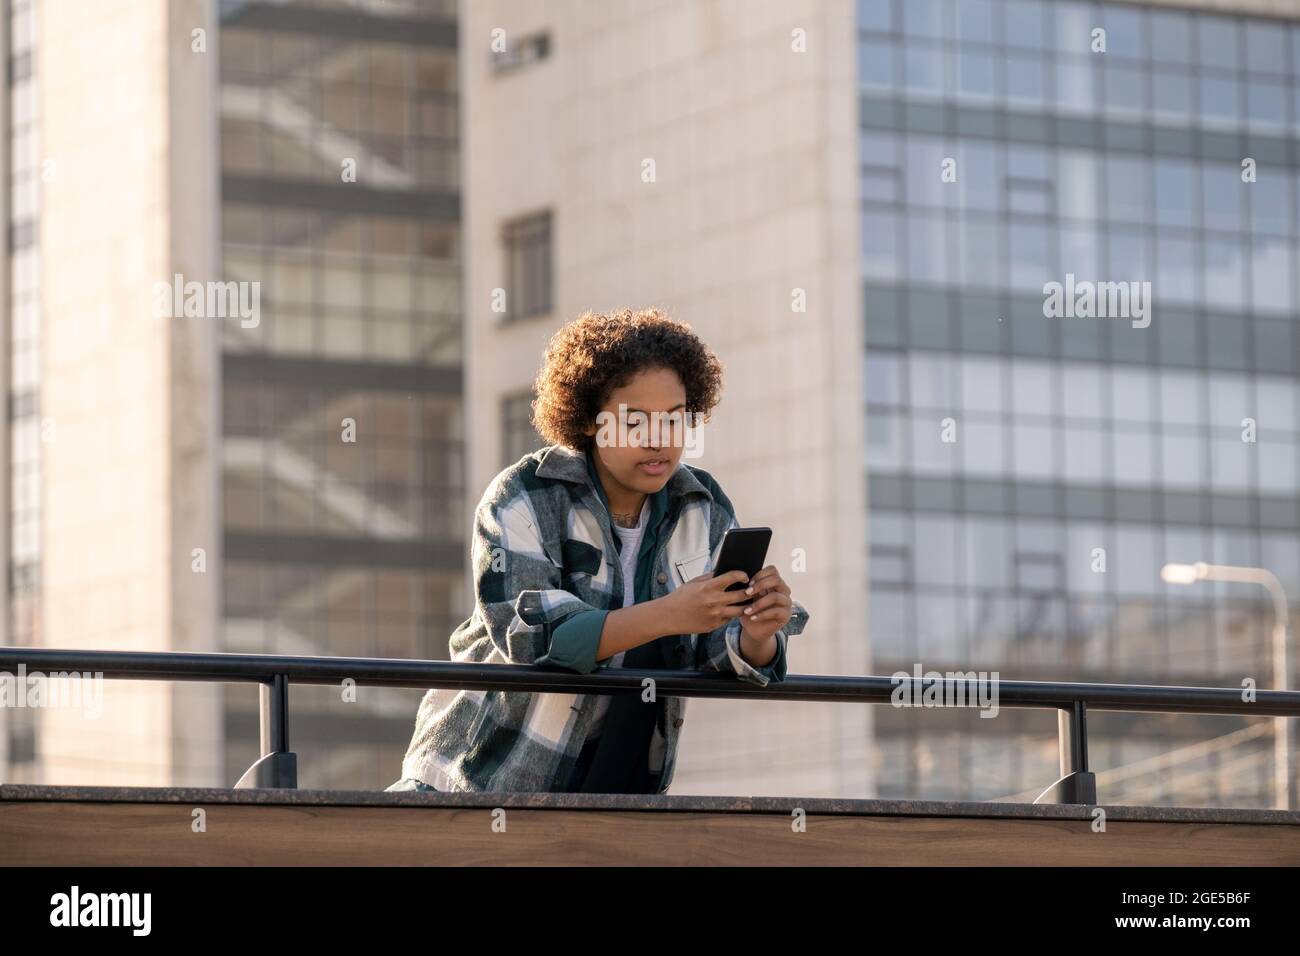 Female teenager scrolling in smartphone while bending over railings against modern architecture Stock Photo